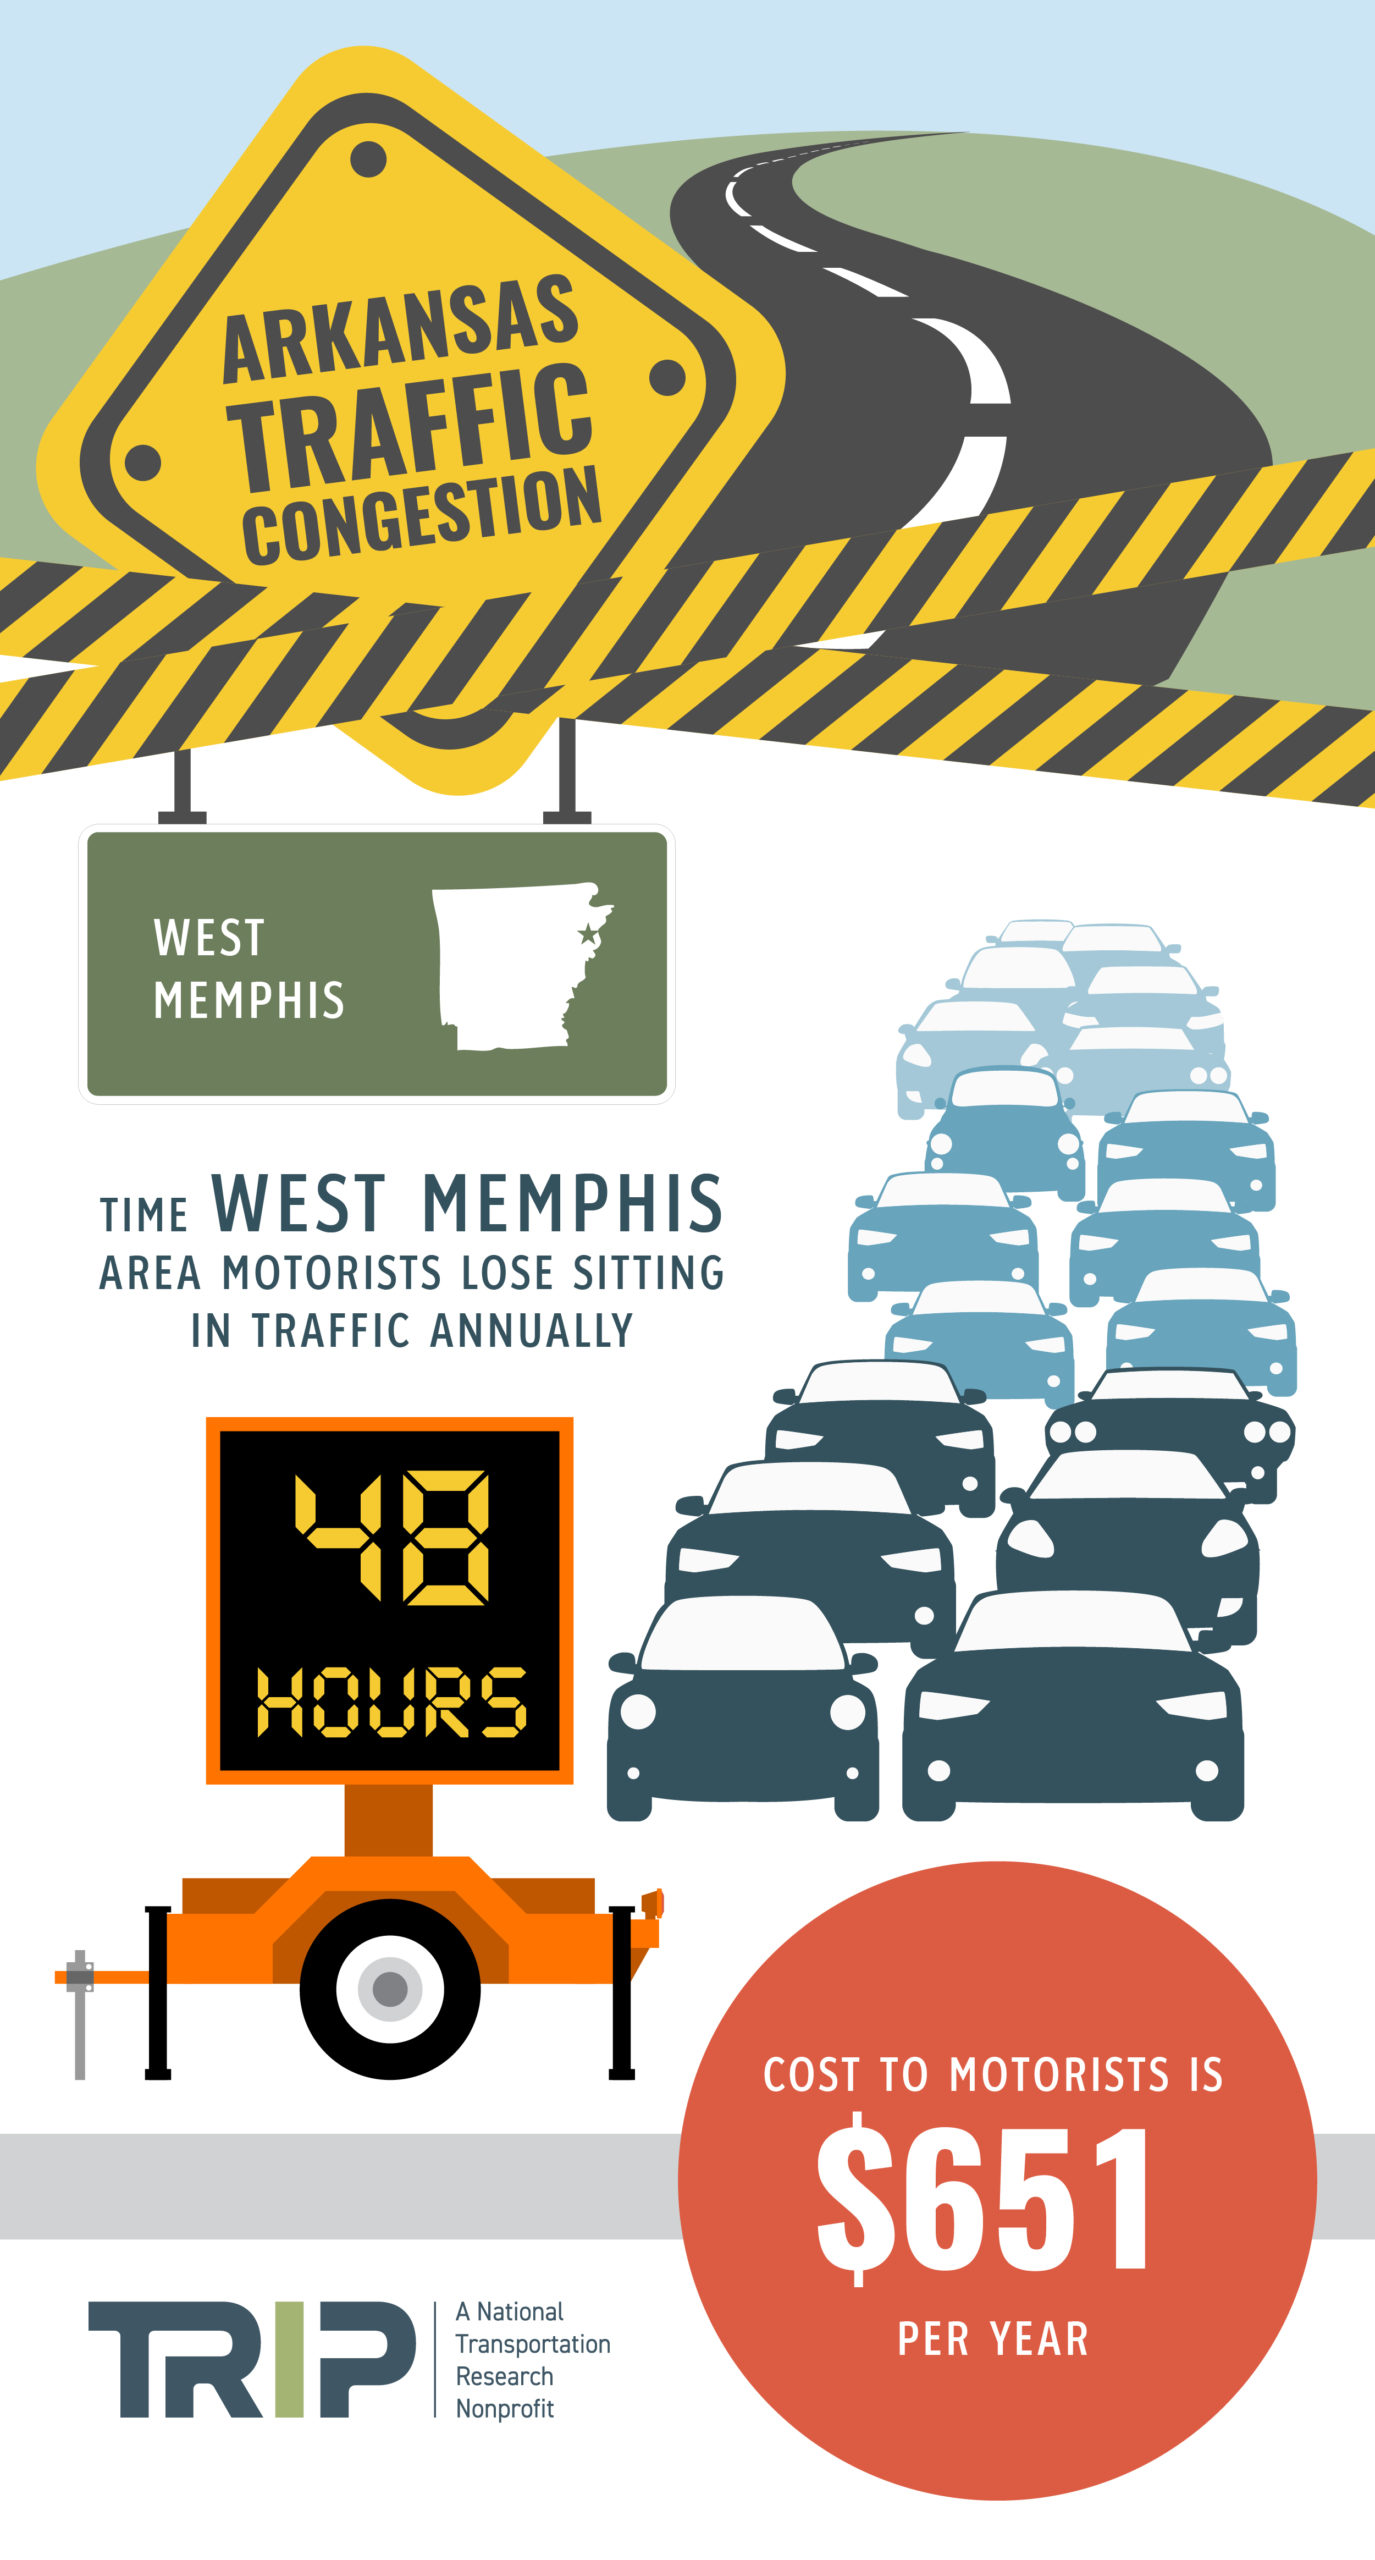 West Memphis Traffic Congestion Infographic – September 2020